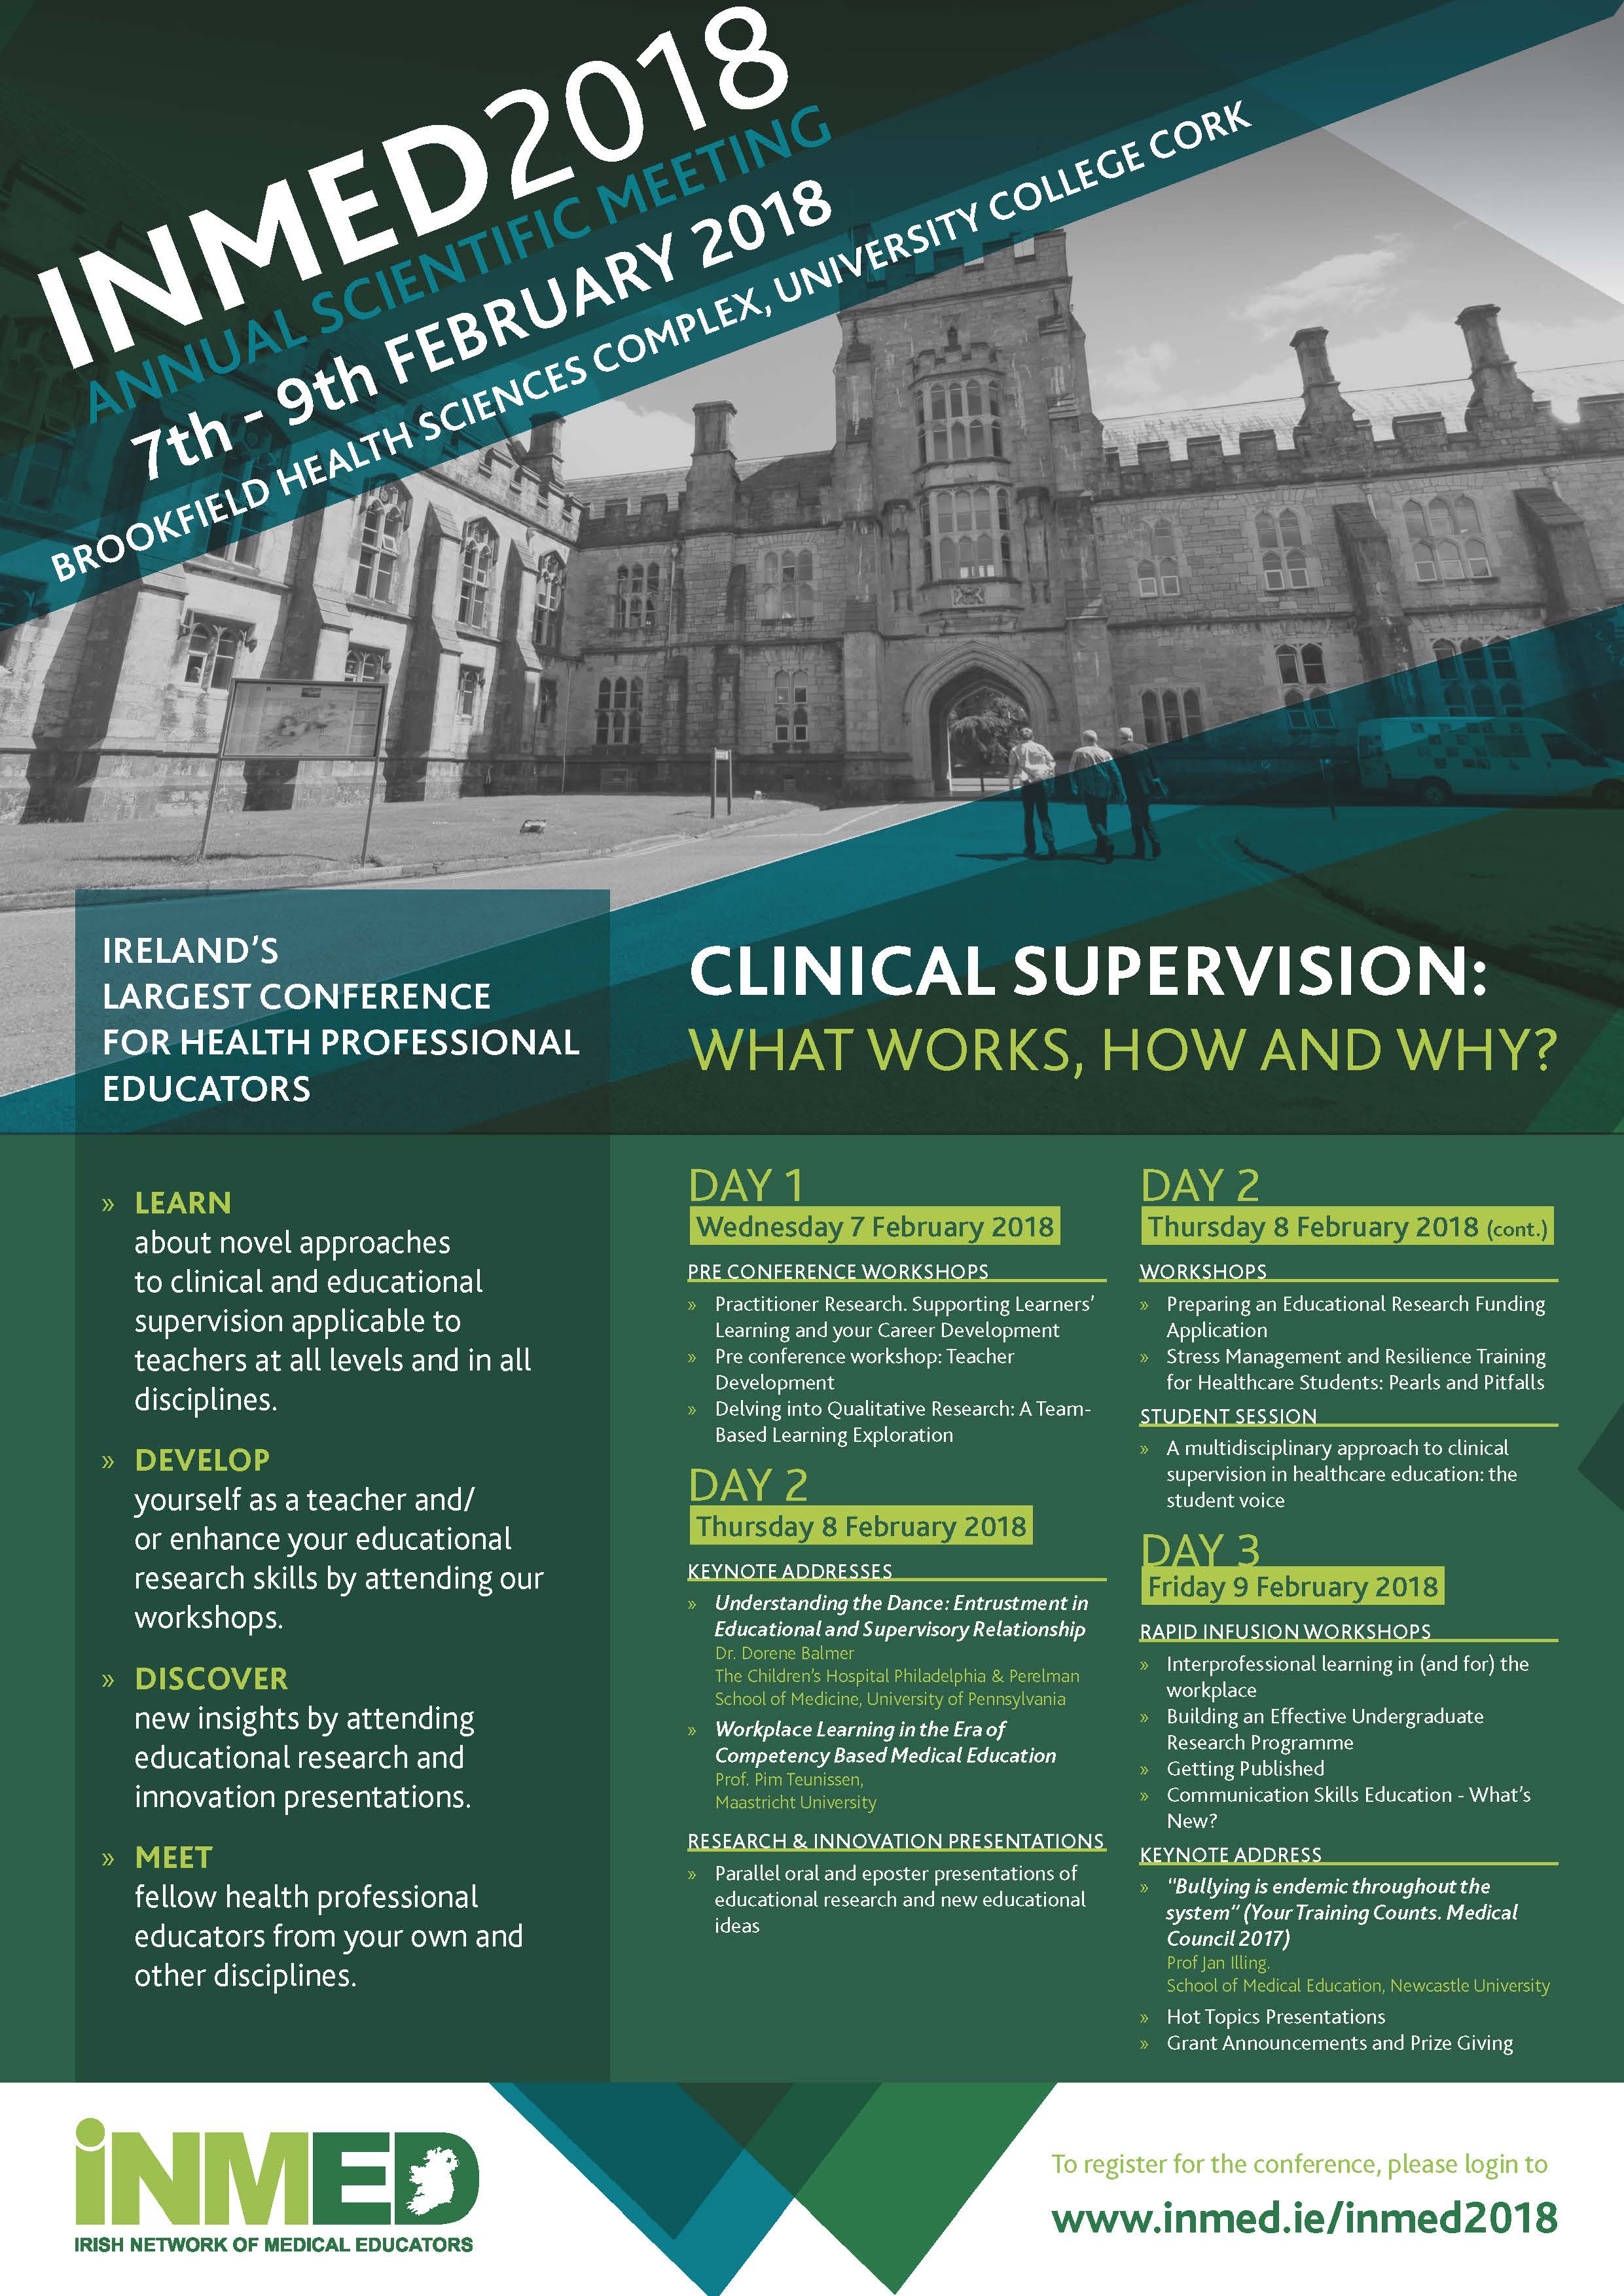 2018 INMED Annual Scientific Meeting, Clinical Supervision: What works, how and why?,  